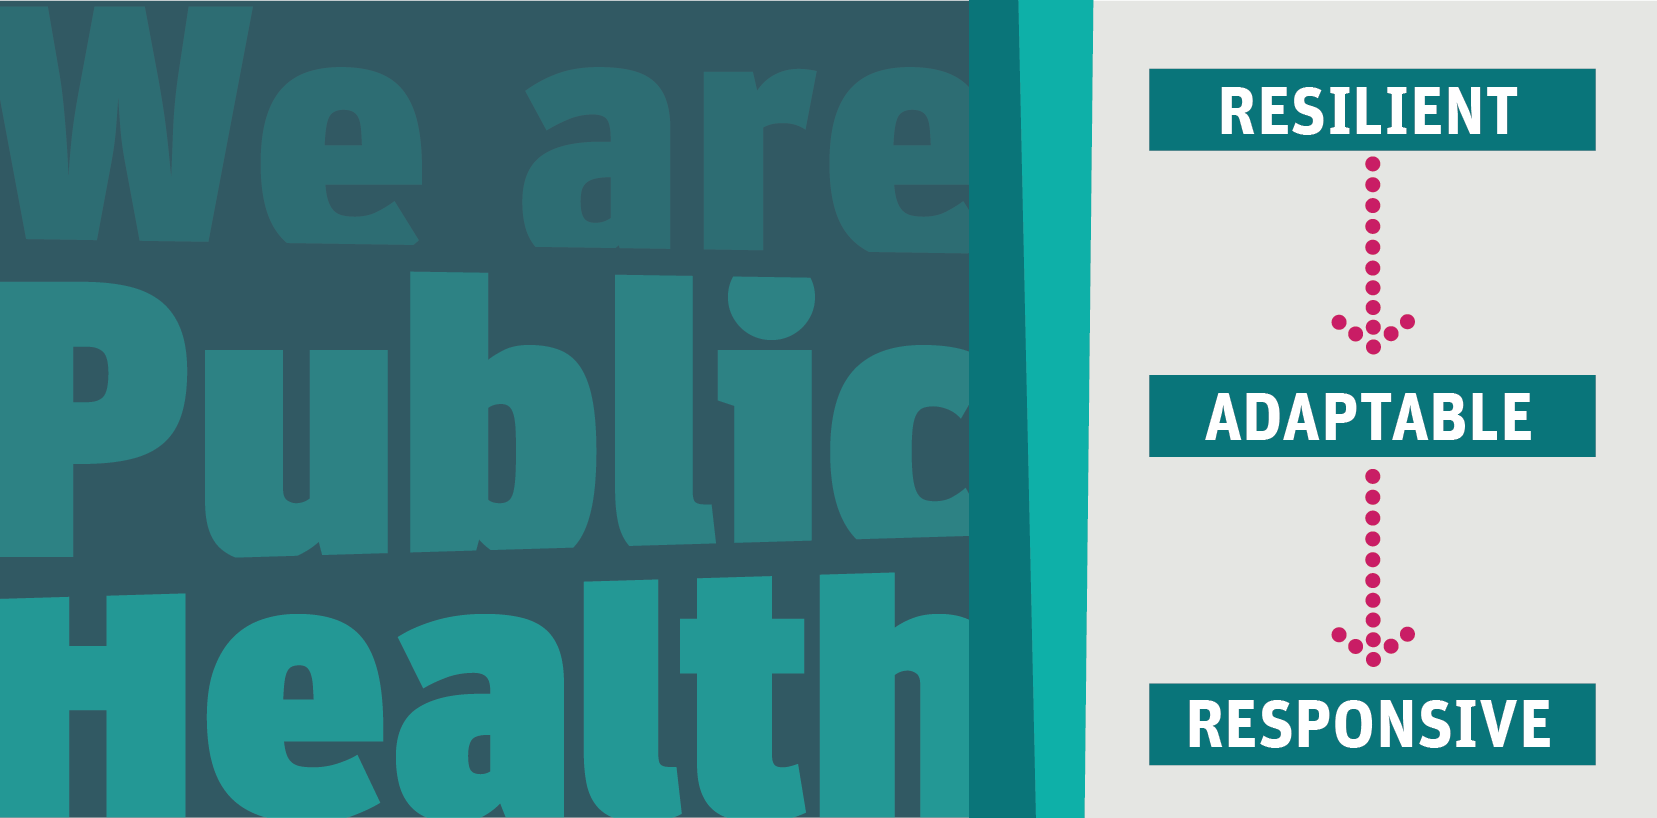 We are public health, Annual Report 2019: resilient, adaptable, responsive